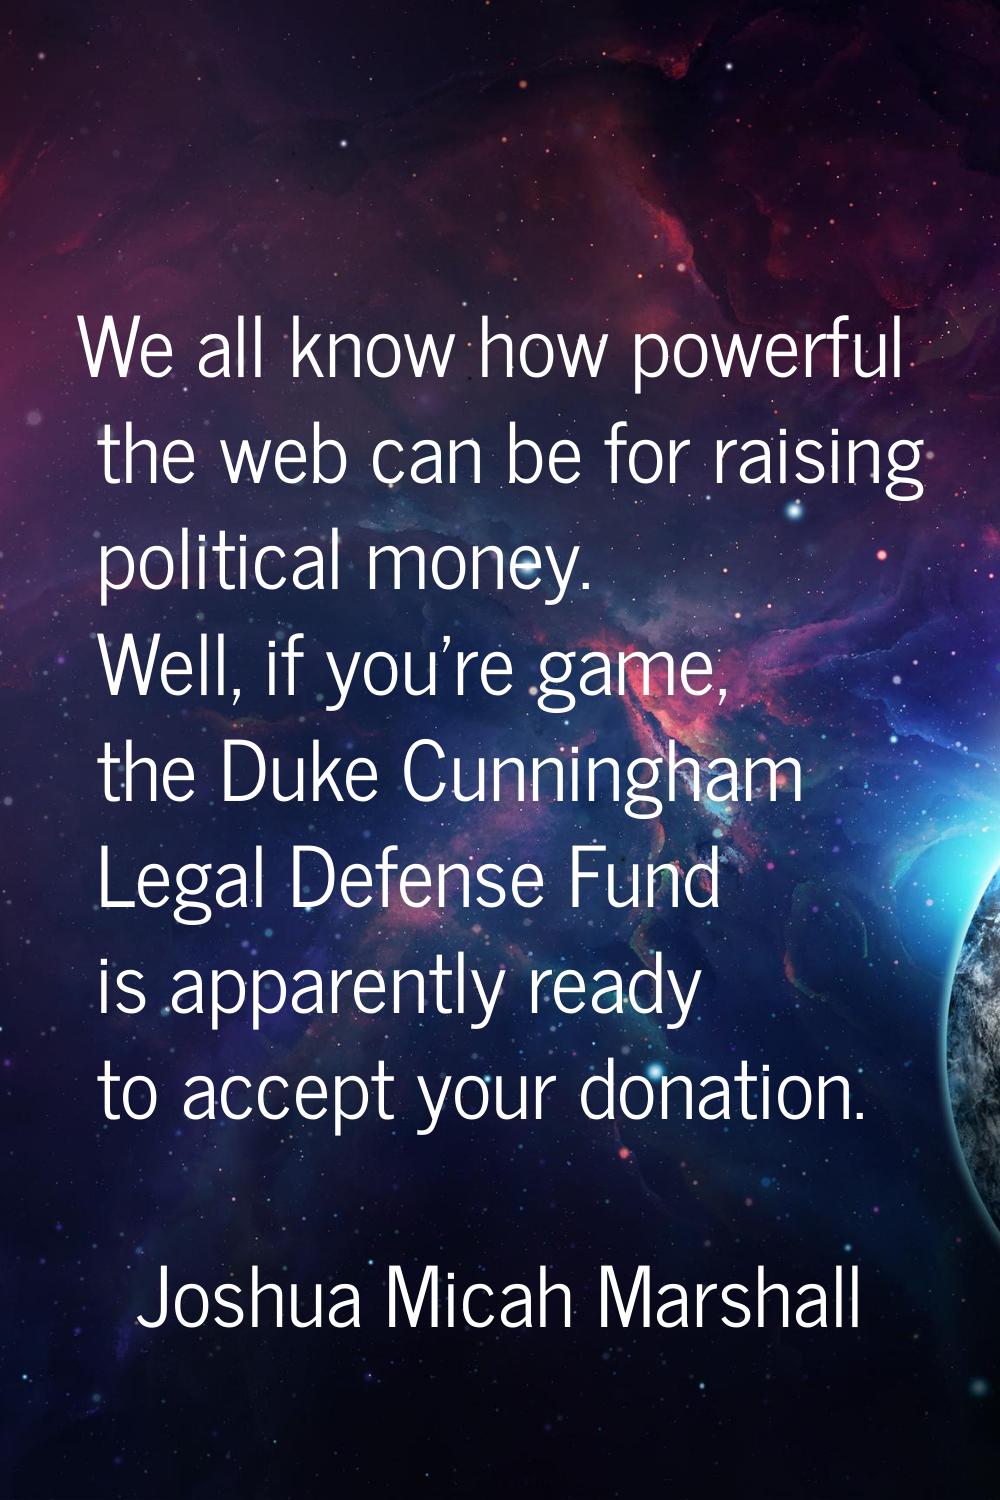 We all know how powerful the web can be for raising political money. Well, if you're game, the Duke